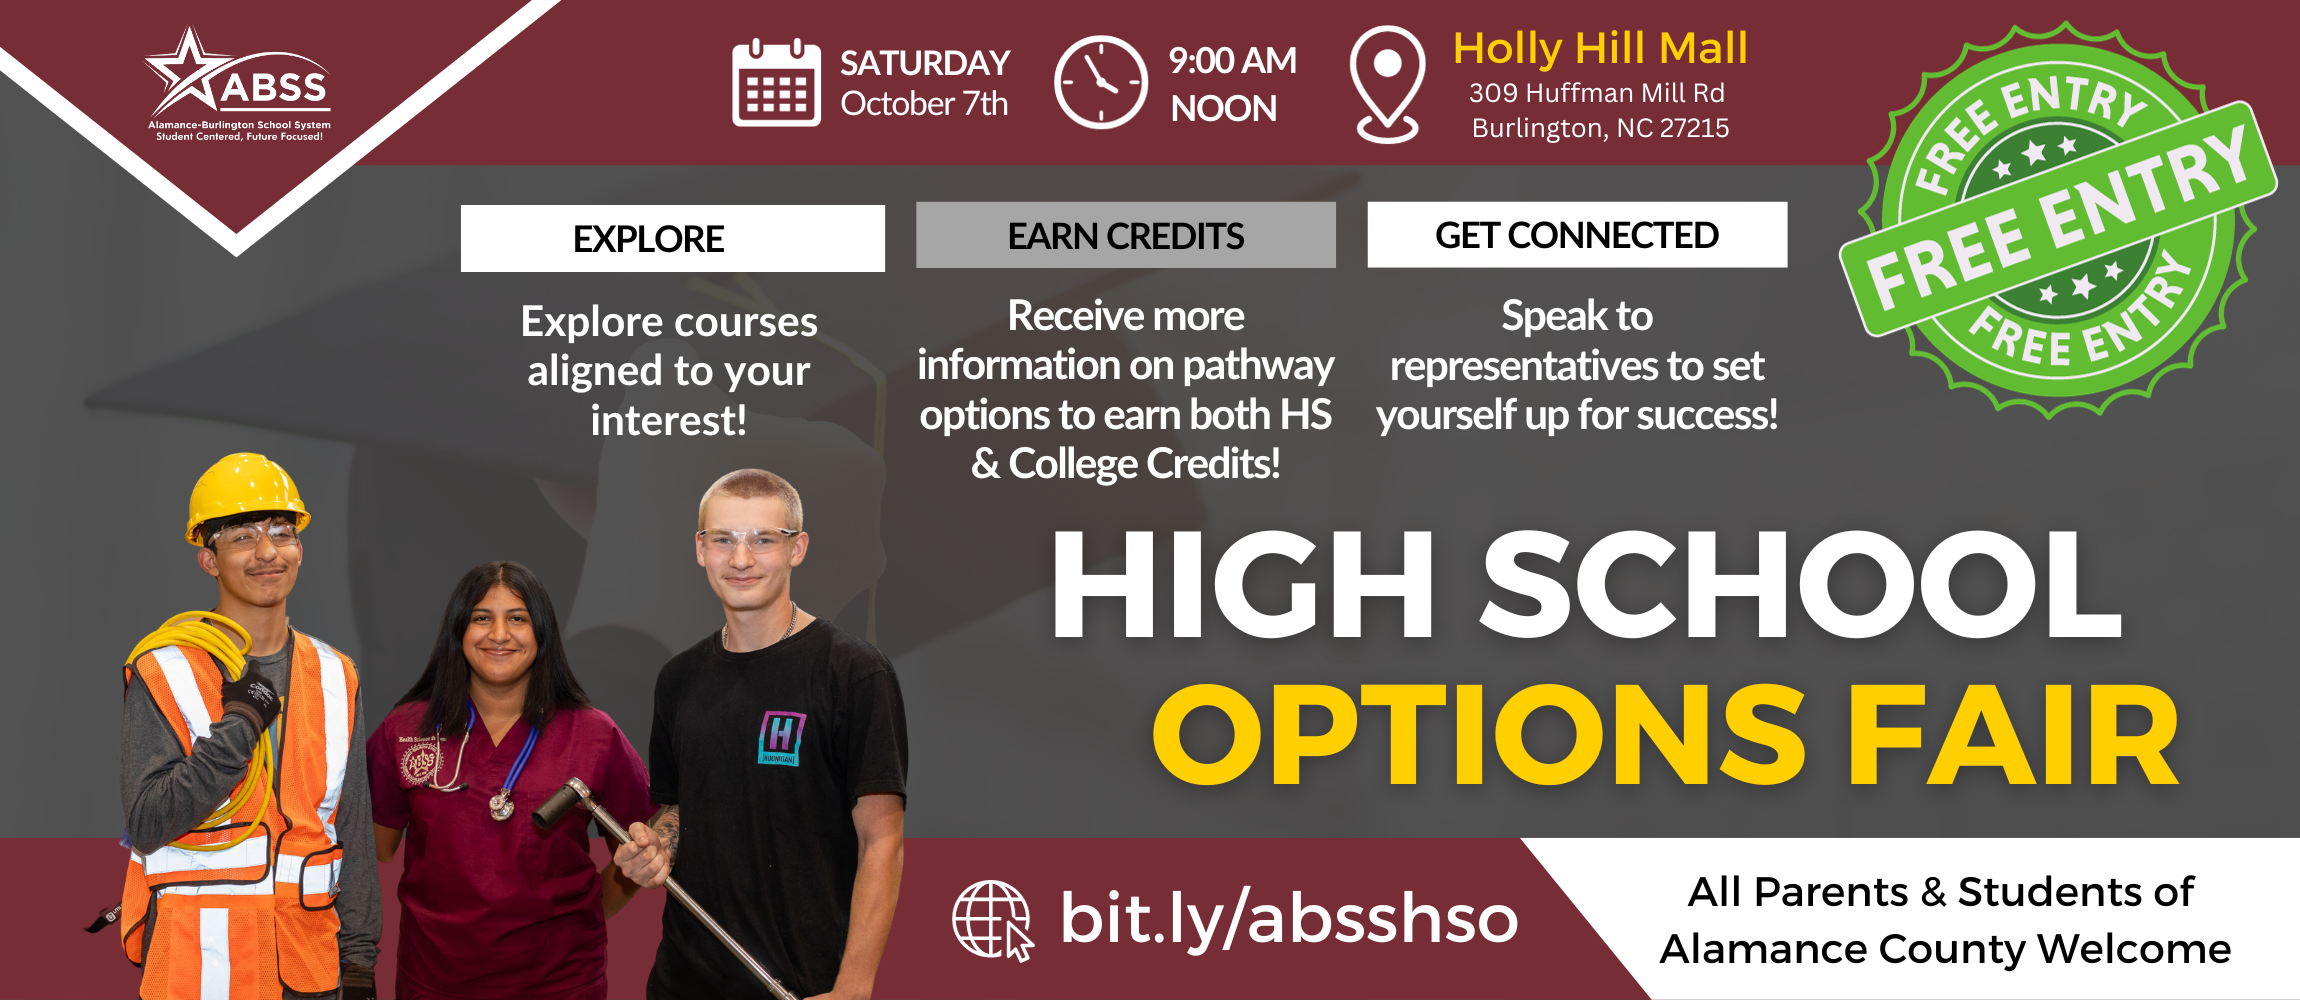 High School Options Fair banner with location, date, and time